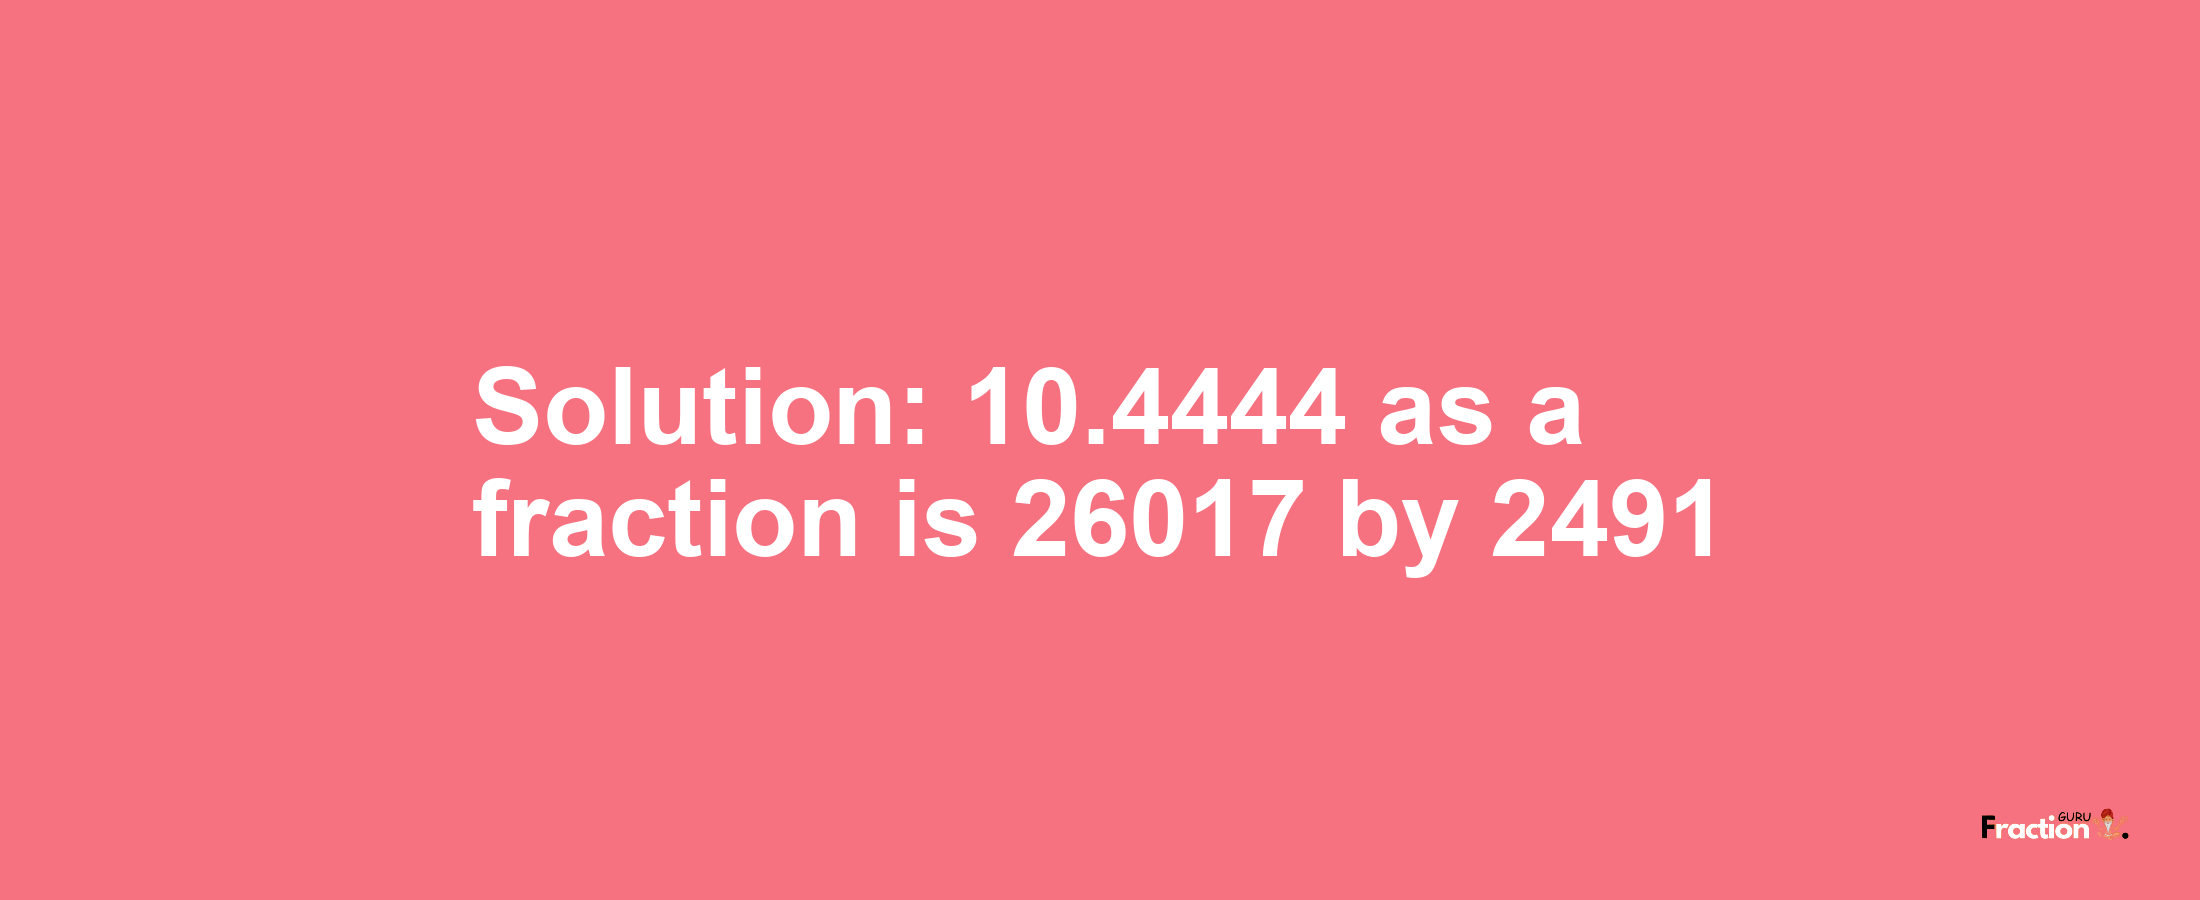 Solution:10.4444 as a fraction is 26017/2491